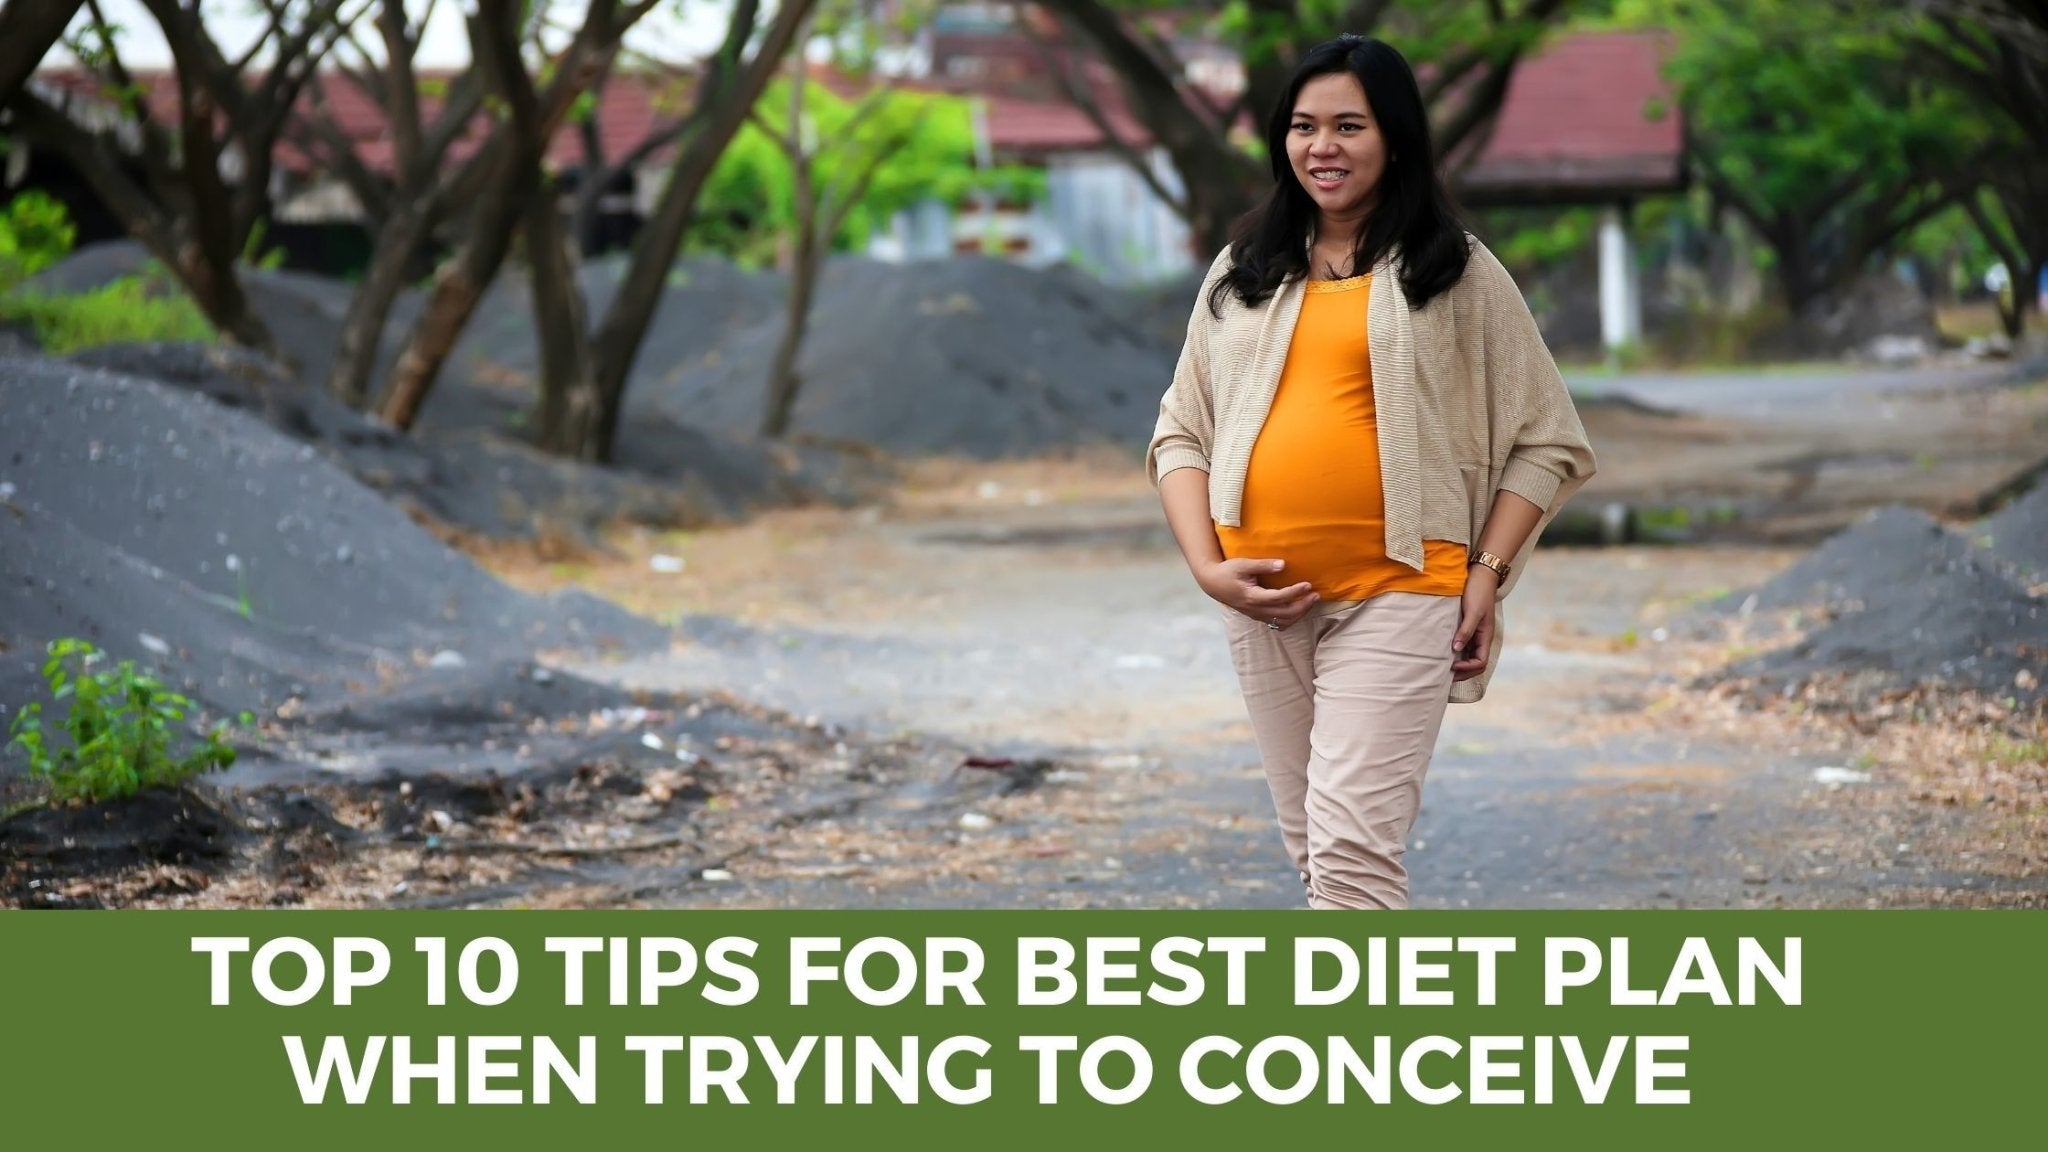 Top 10 Tips for Best Diet Plan When Trying to Conceive - HerbalHermit USA